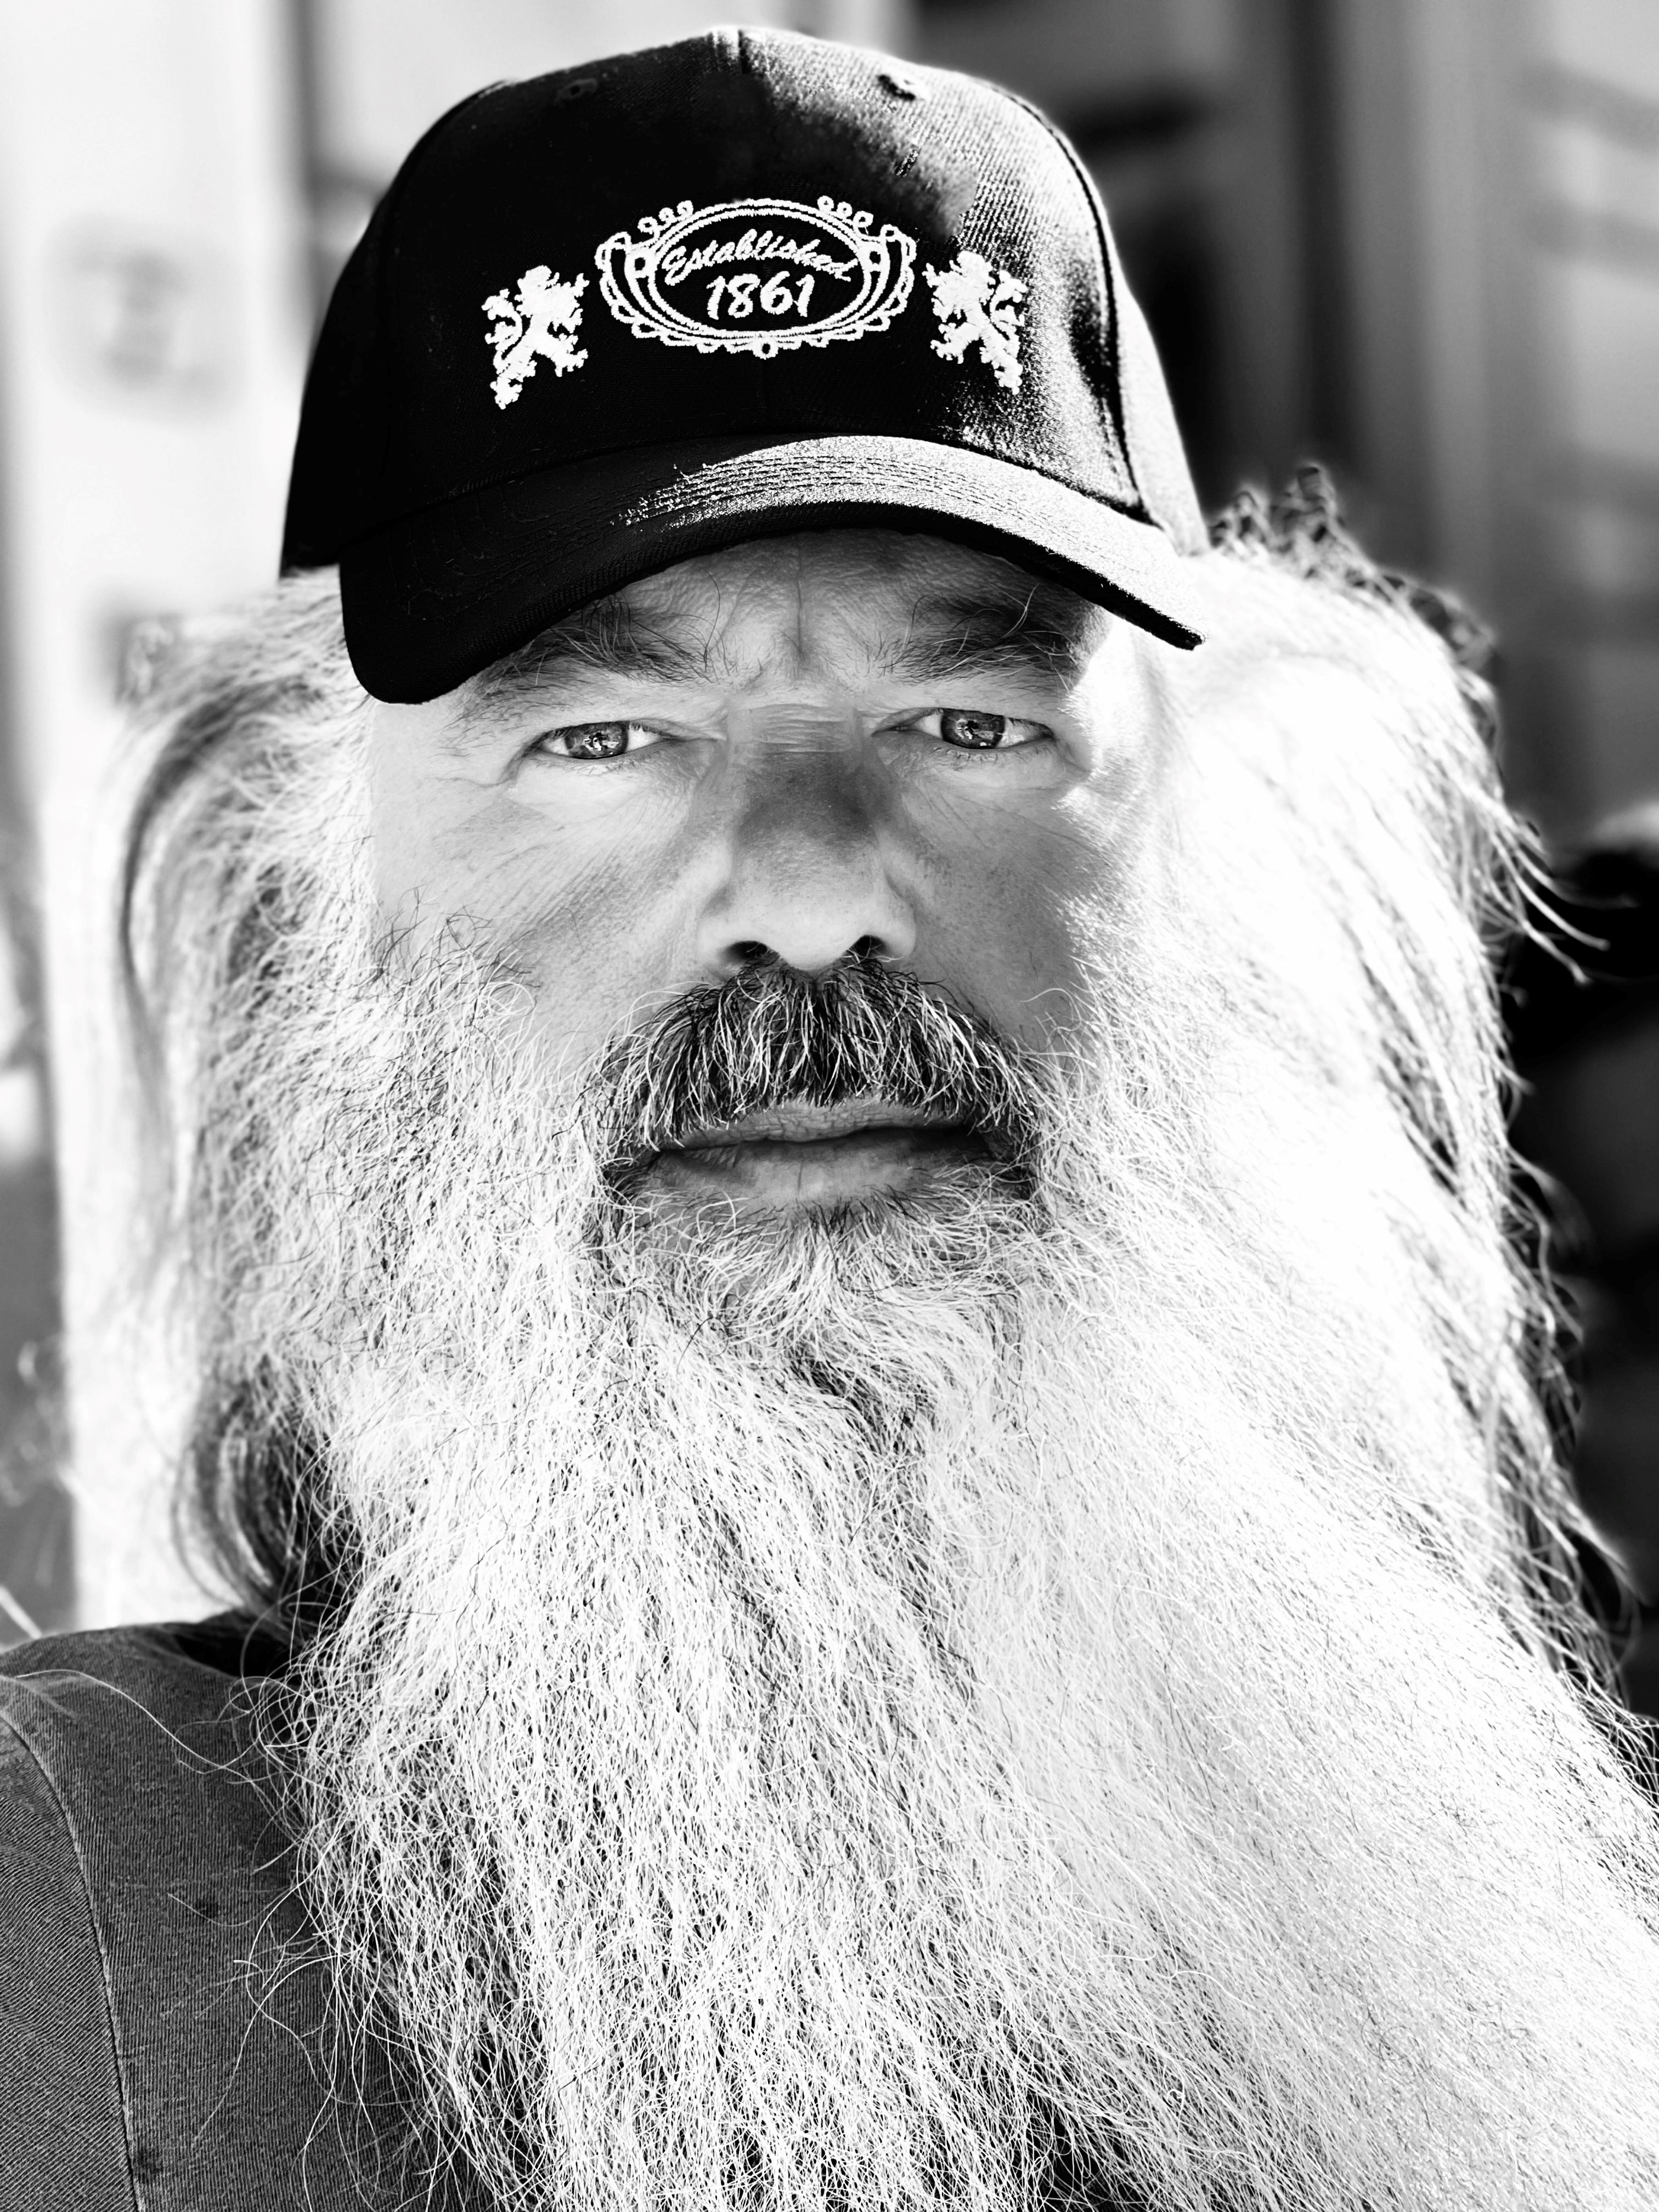 We all are creative beings': Rick Rubin says anyone can make a great work  of art